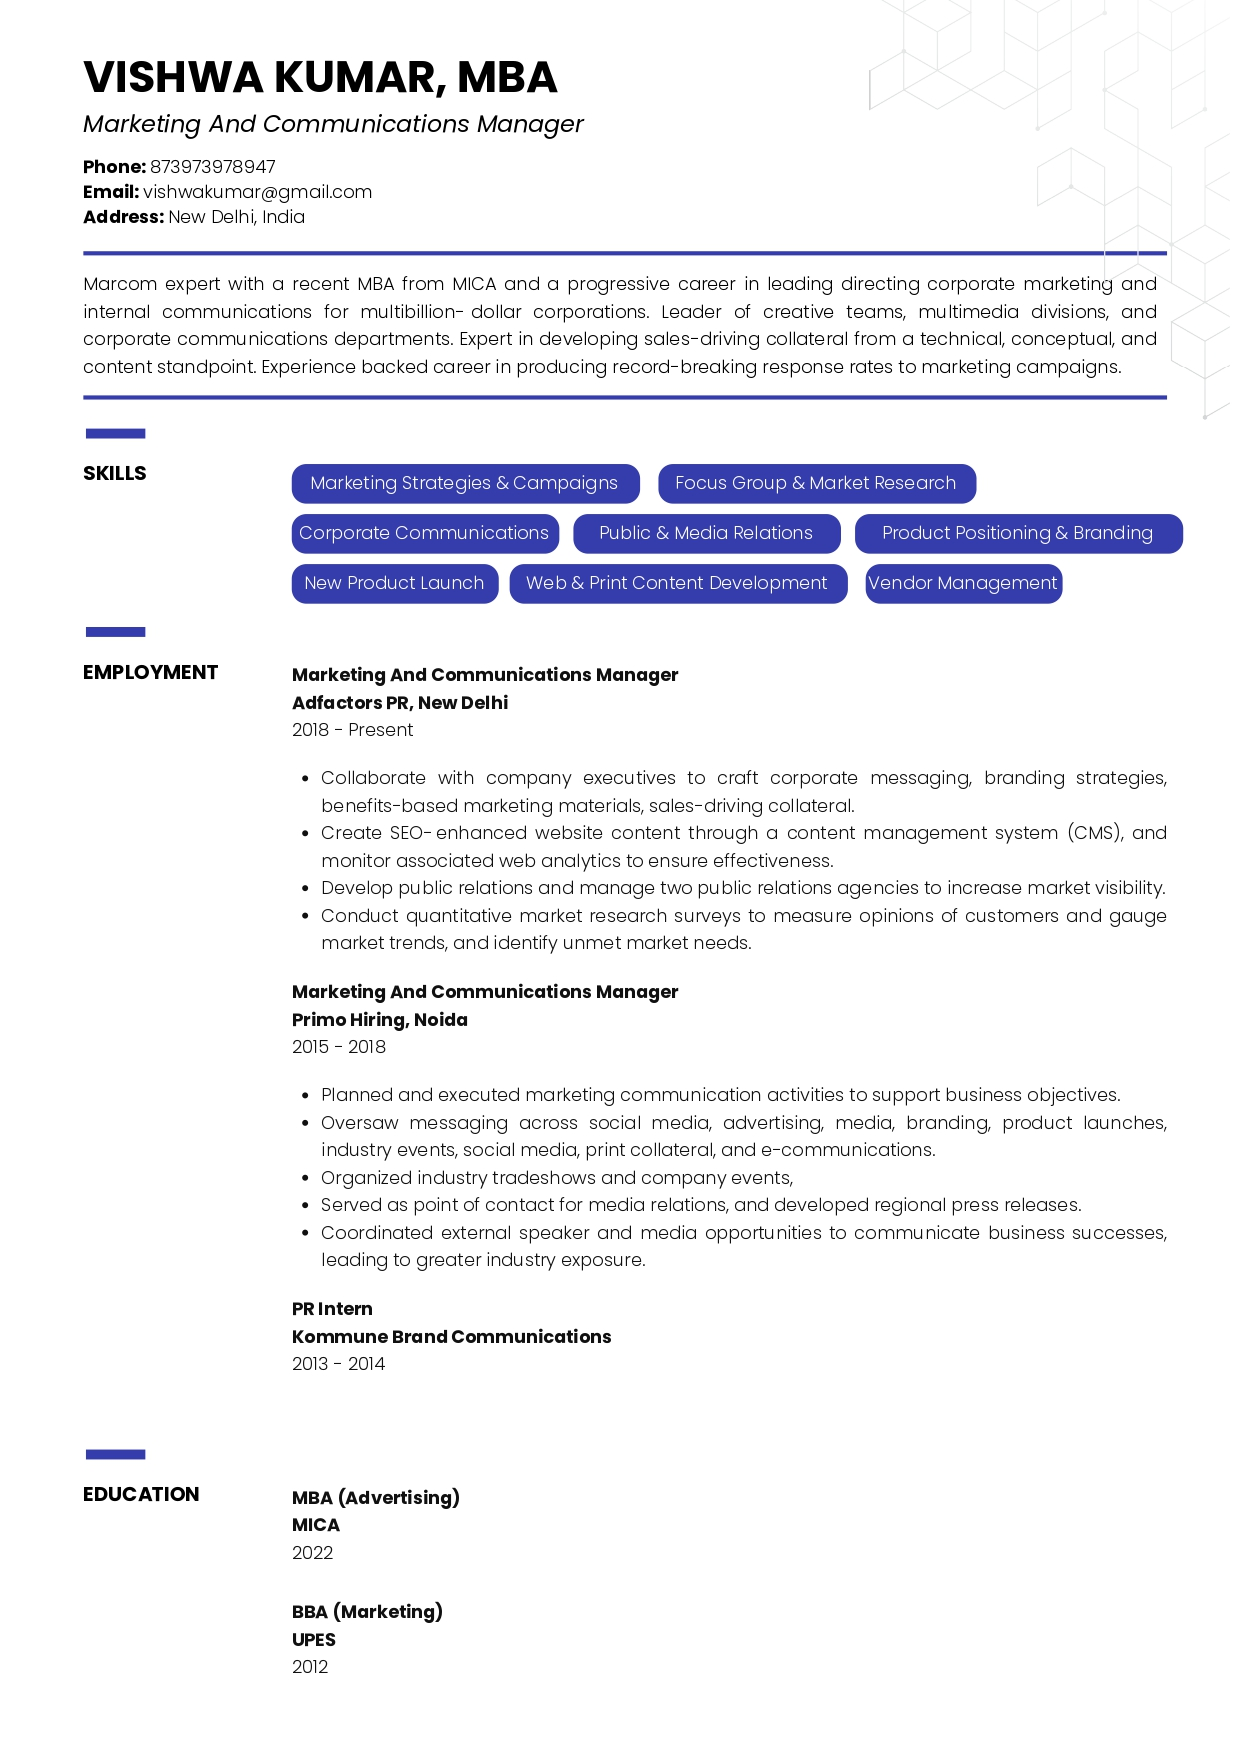 Resume of Marketing aand Communications Manager built on Resumod